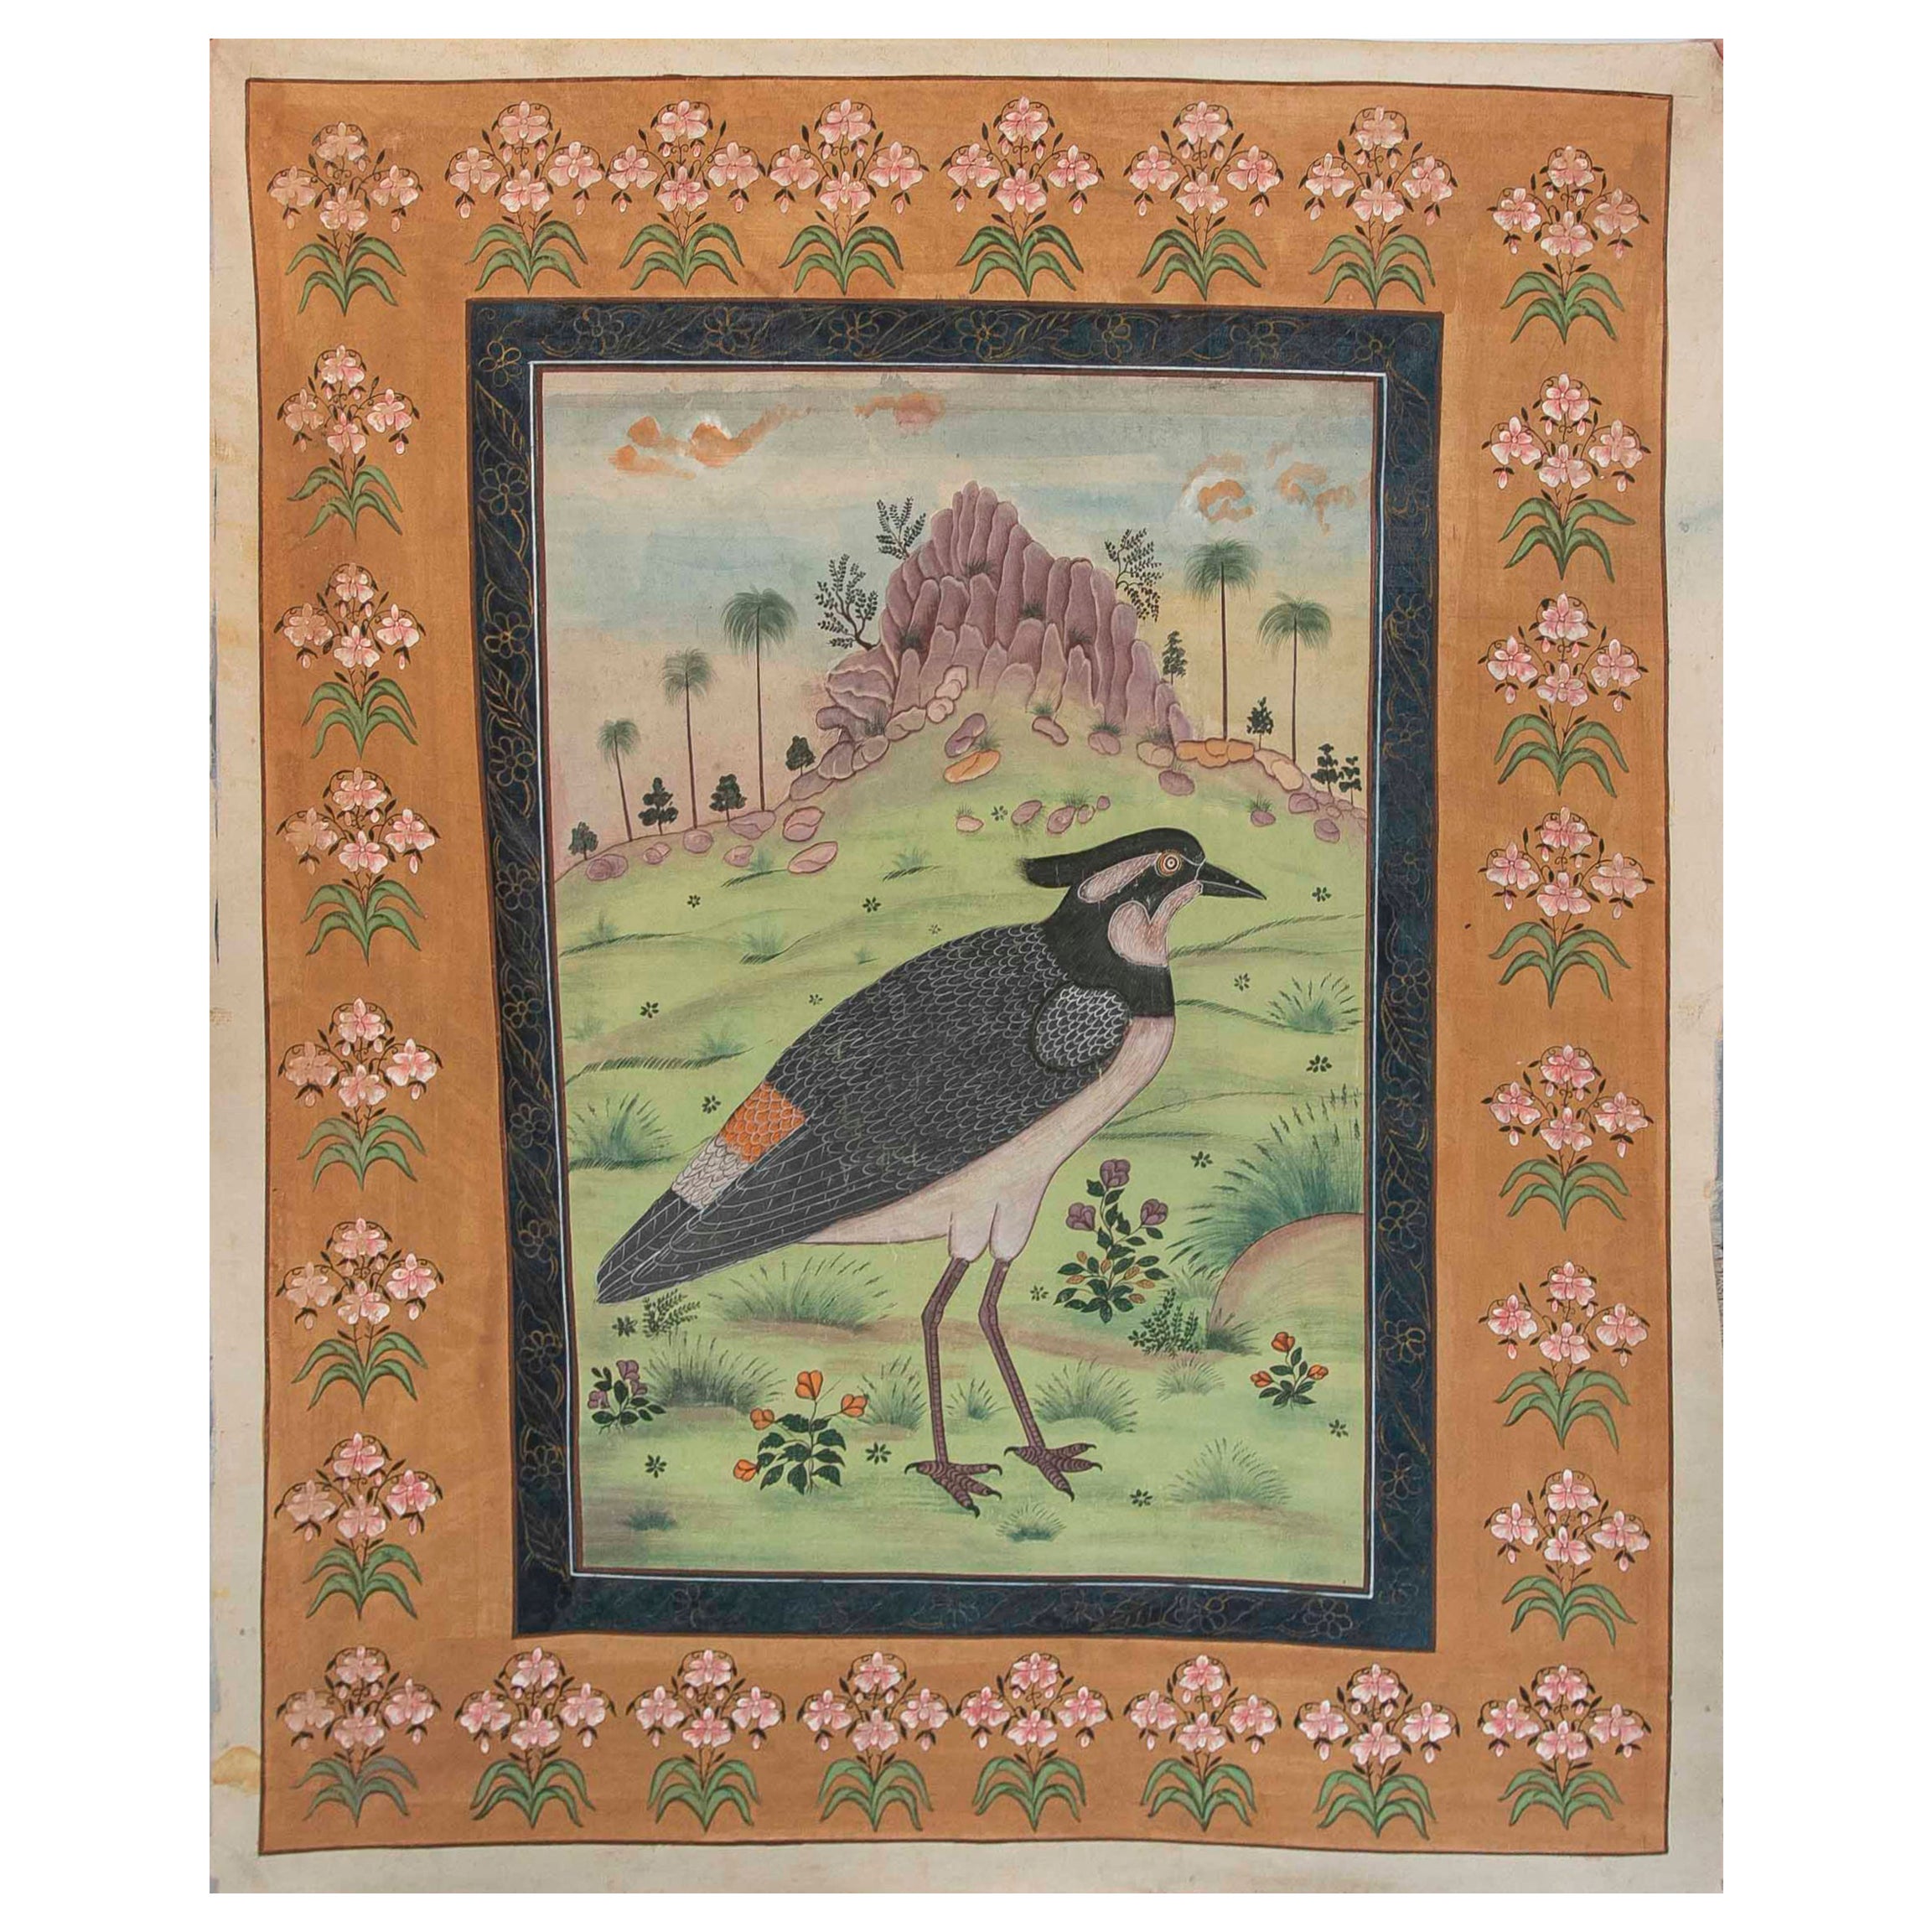 Hand-Painted of a Bird on Canvas Among Nature with a Flower Border 